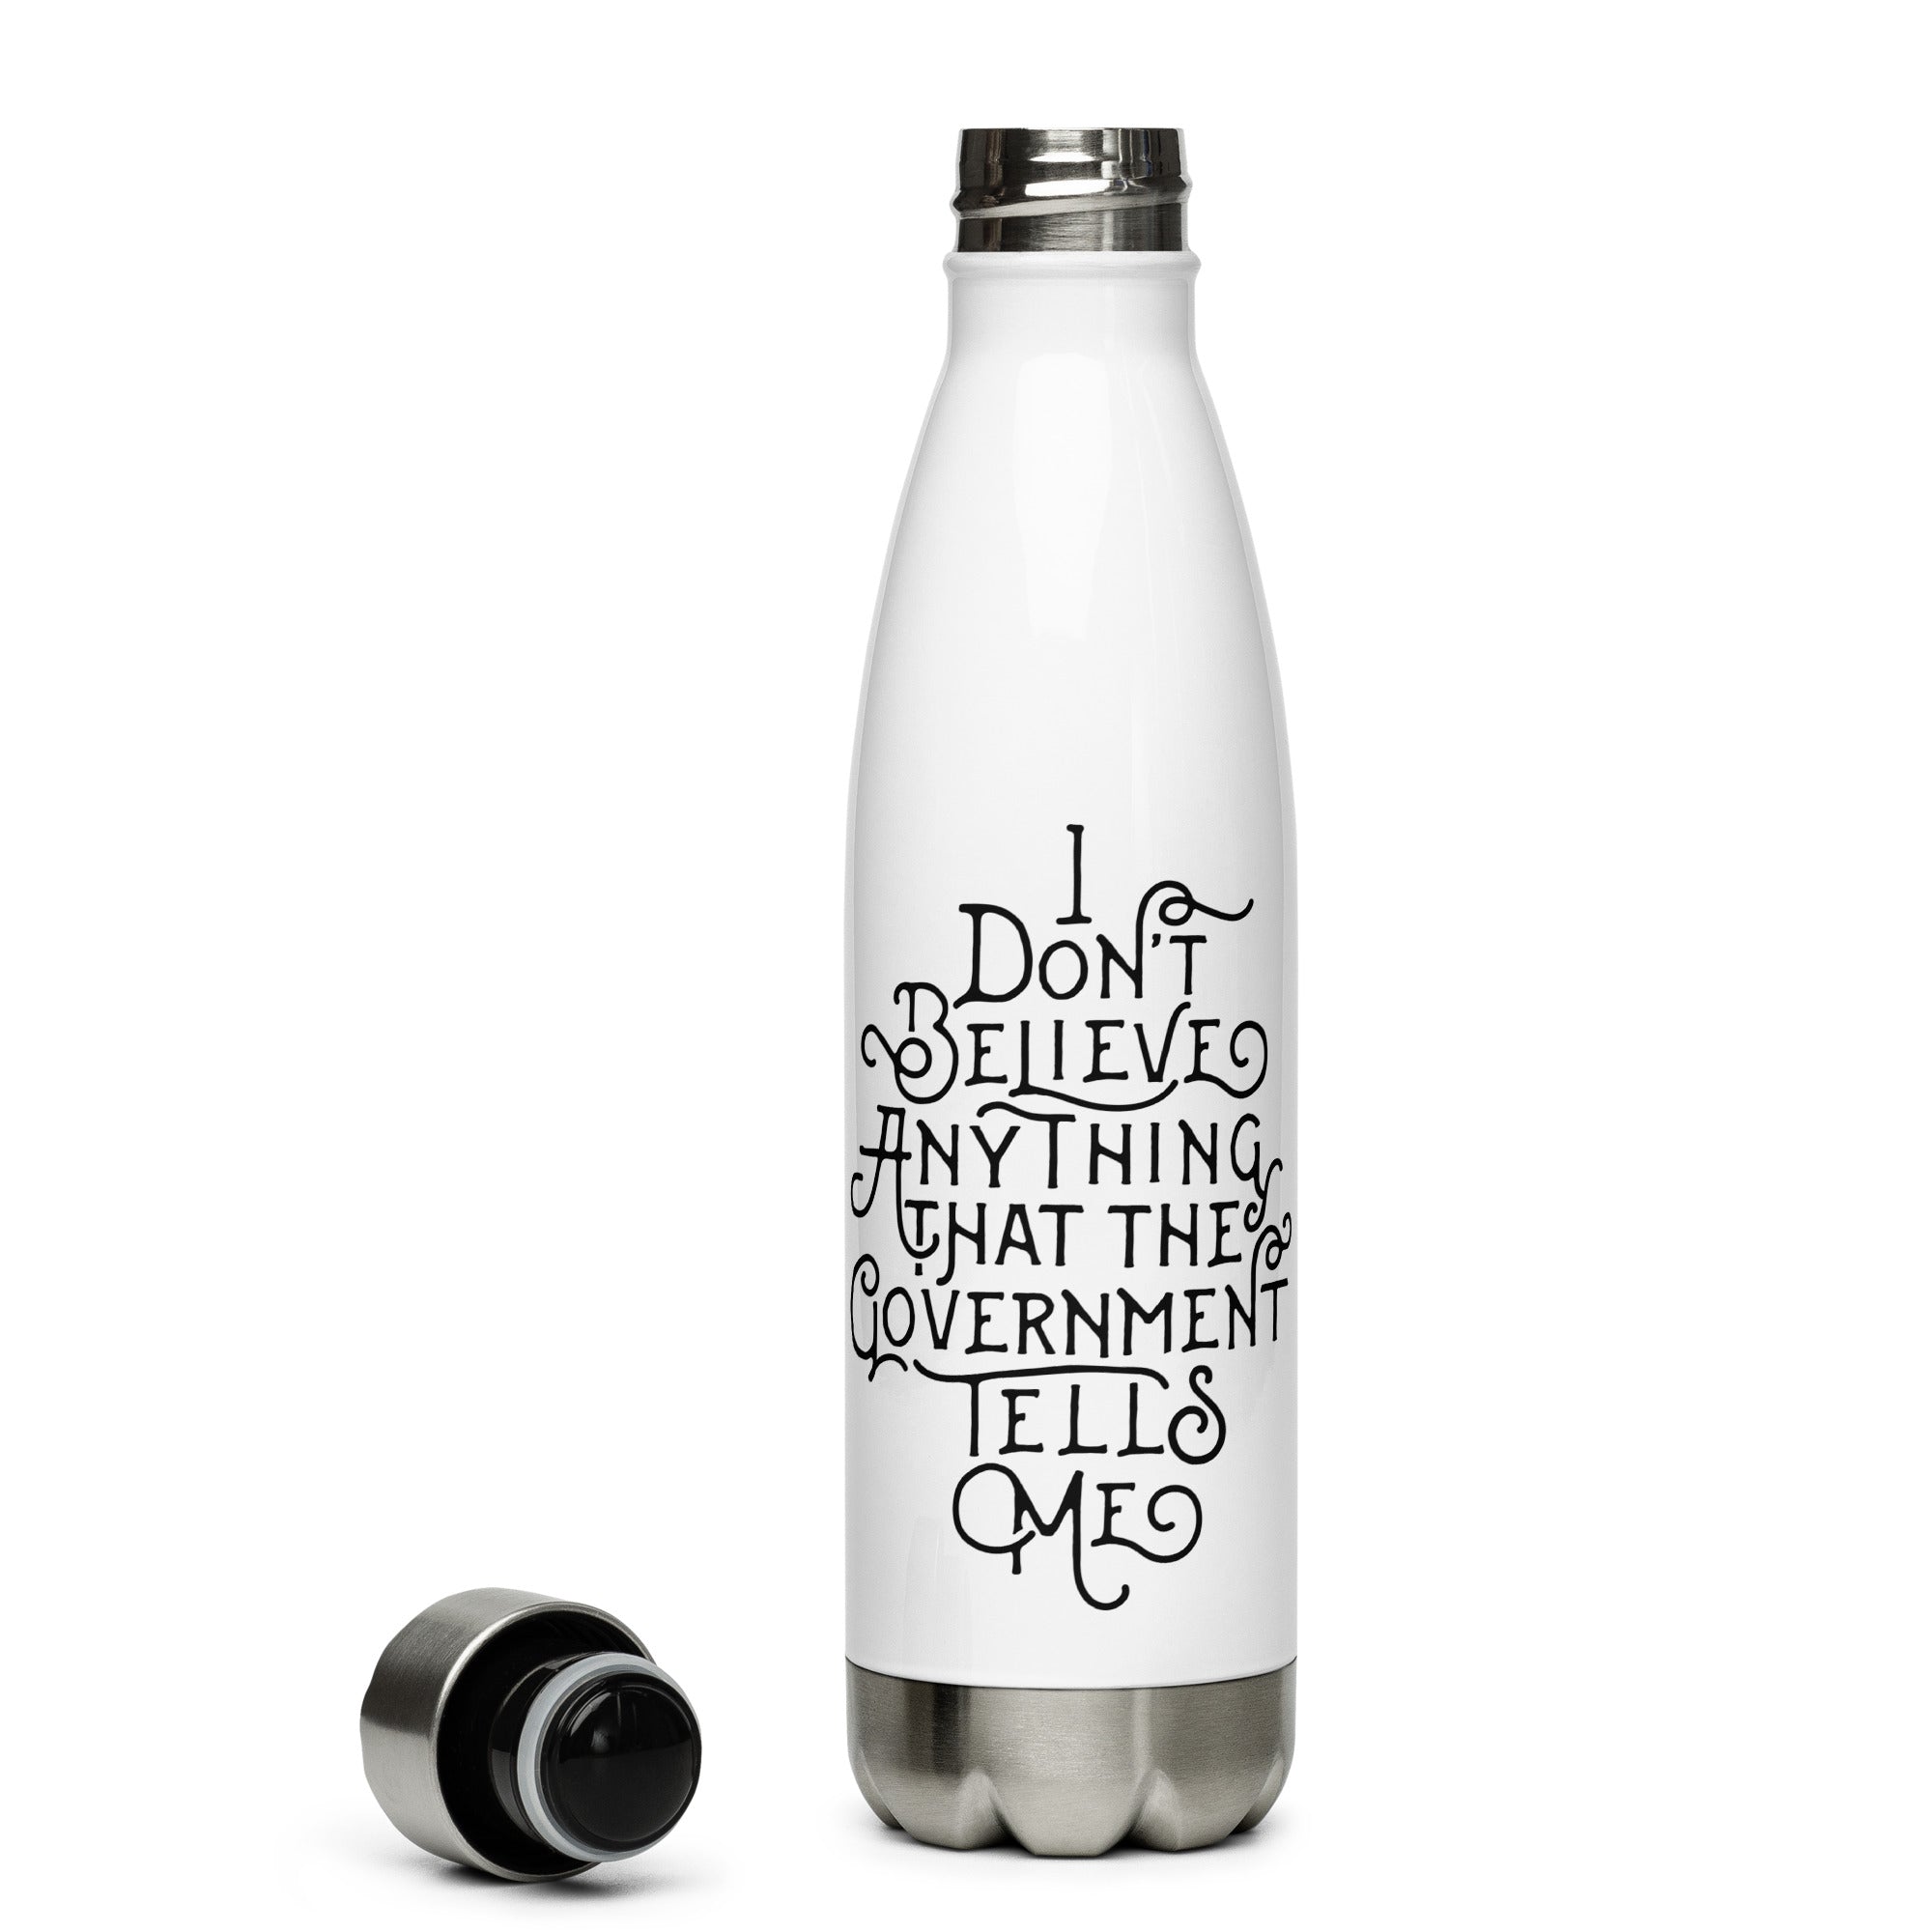 I Don't Believe anything the Government Tells Me Stainless Steel Water Bottle